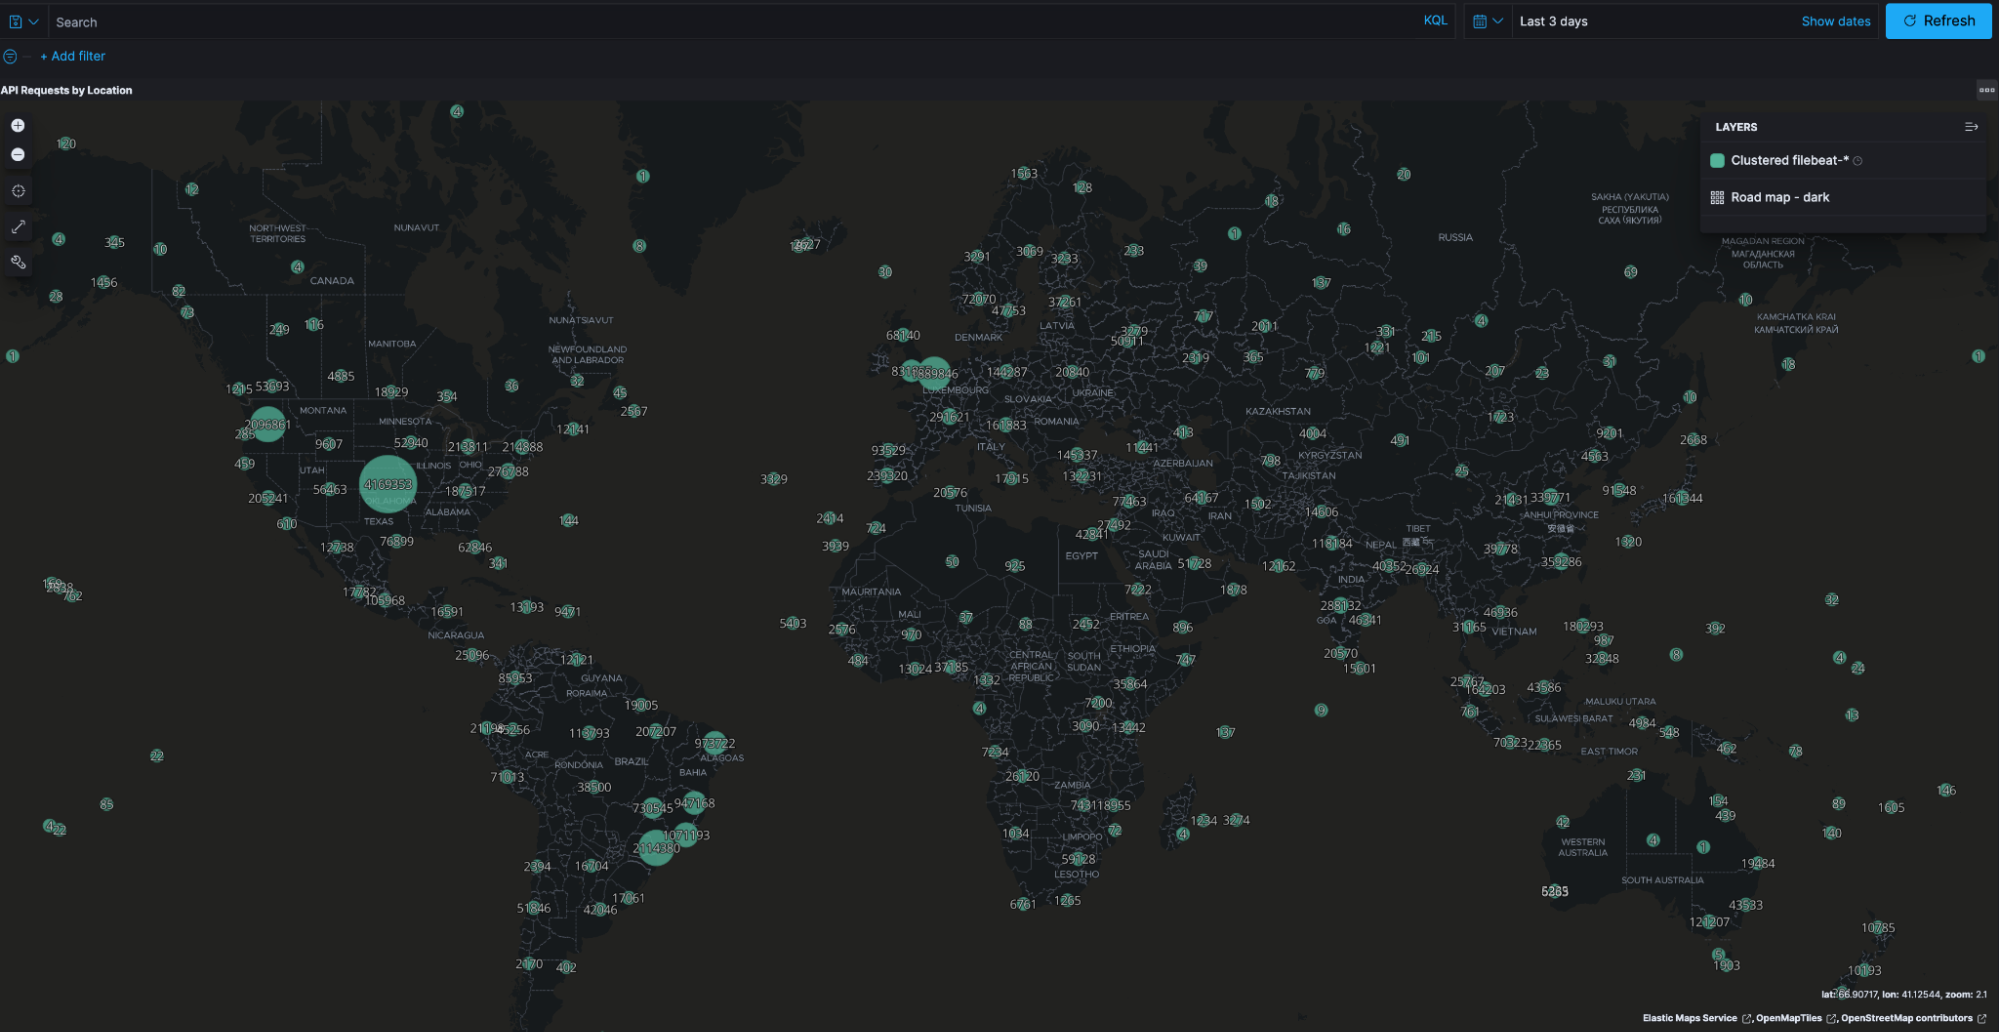 Map of API requests by location